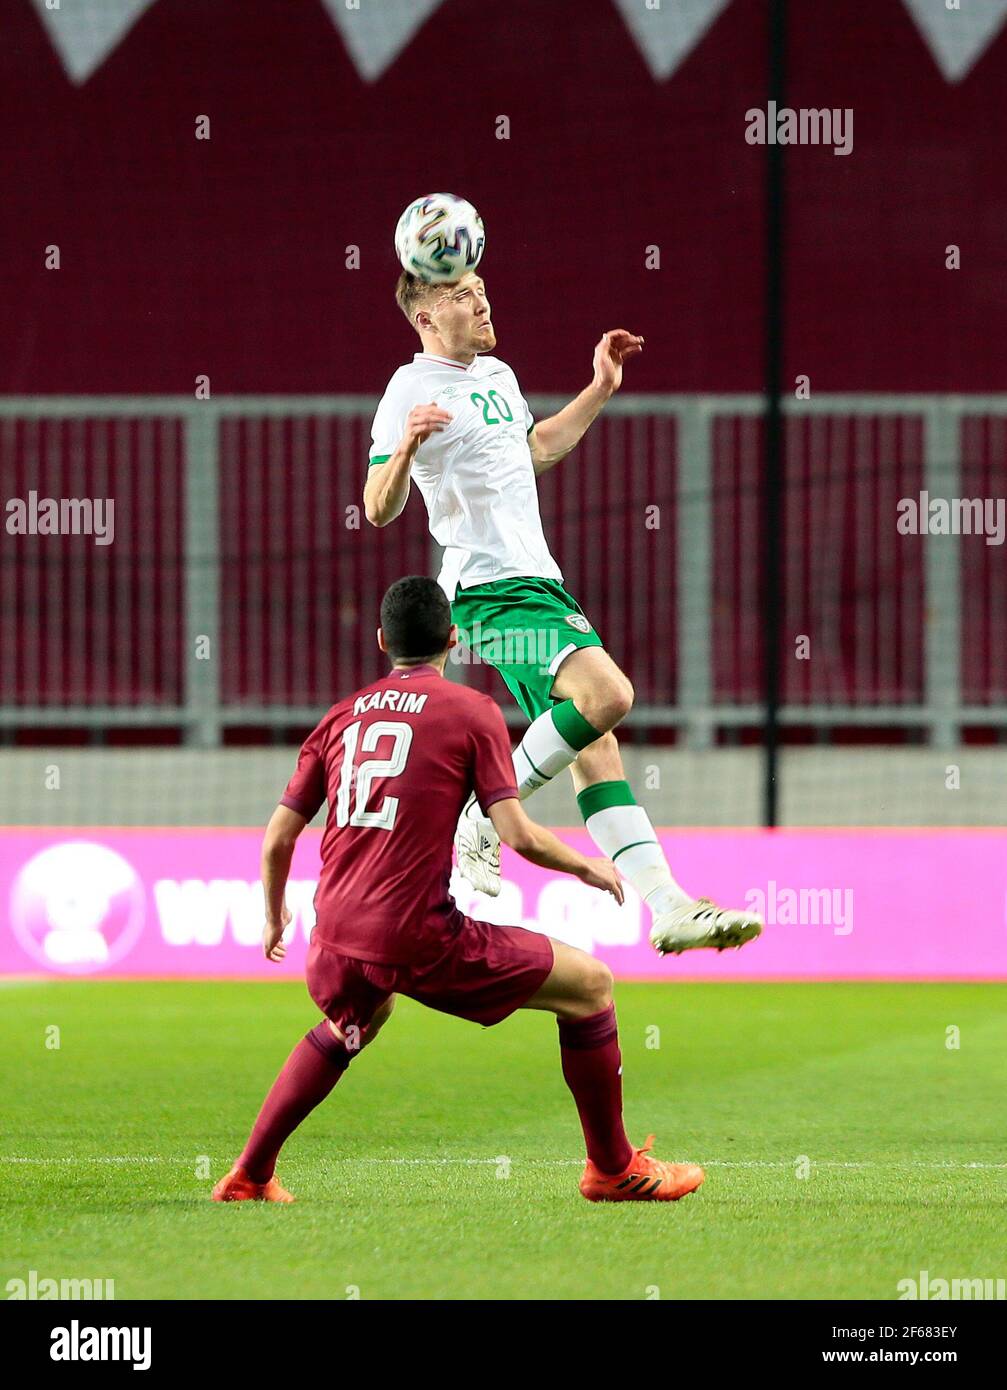 Qatar's Karim Boudiaf (left) and Republic of Ireland's Dara O'Shea battle for the ball during the international friendly match at Nagyerdei Stadion, Hungary. Picture date: Tuesday March 30, 2021. Stock Photo